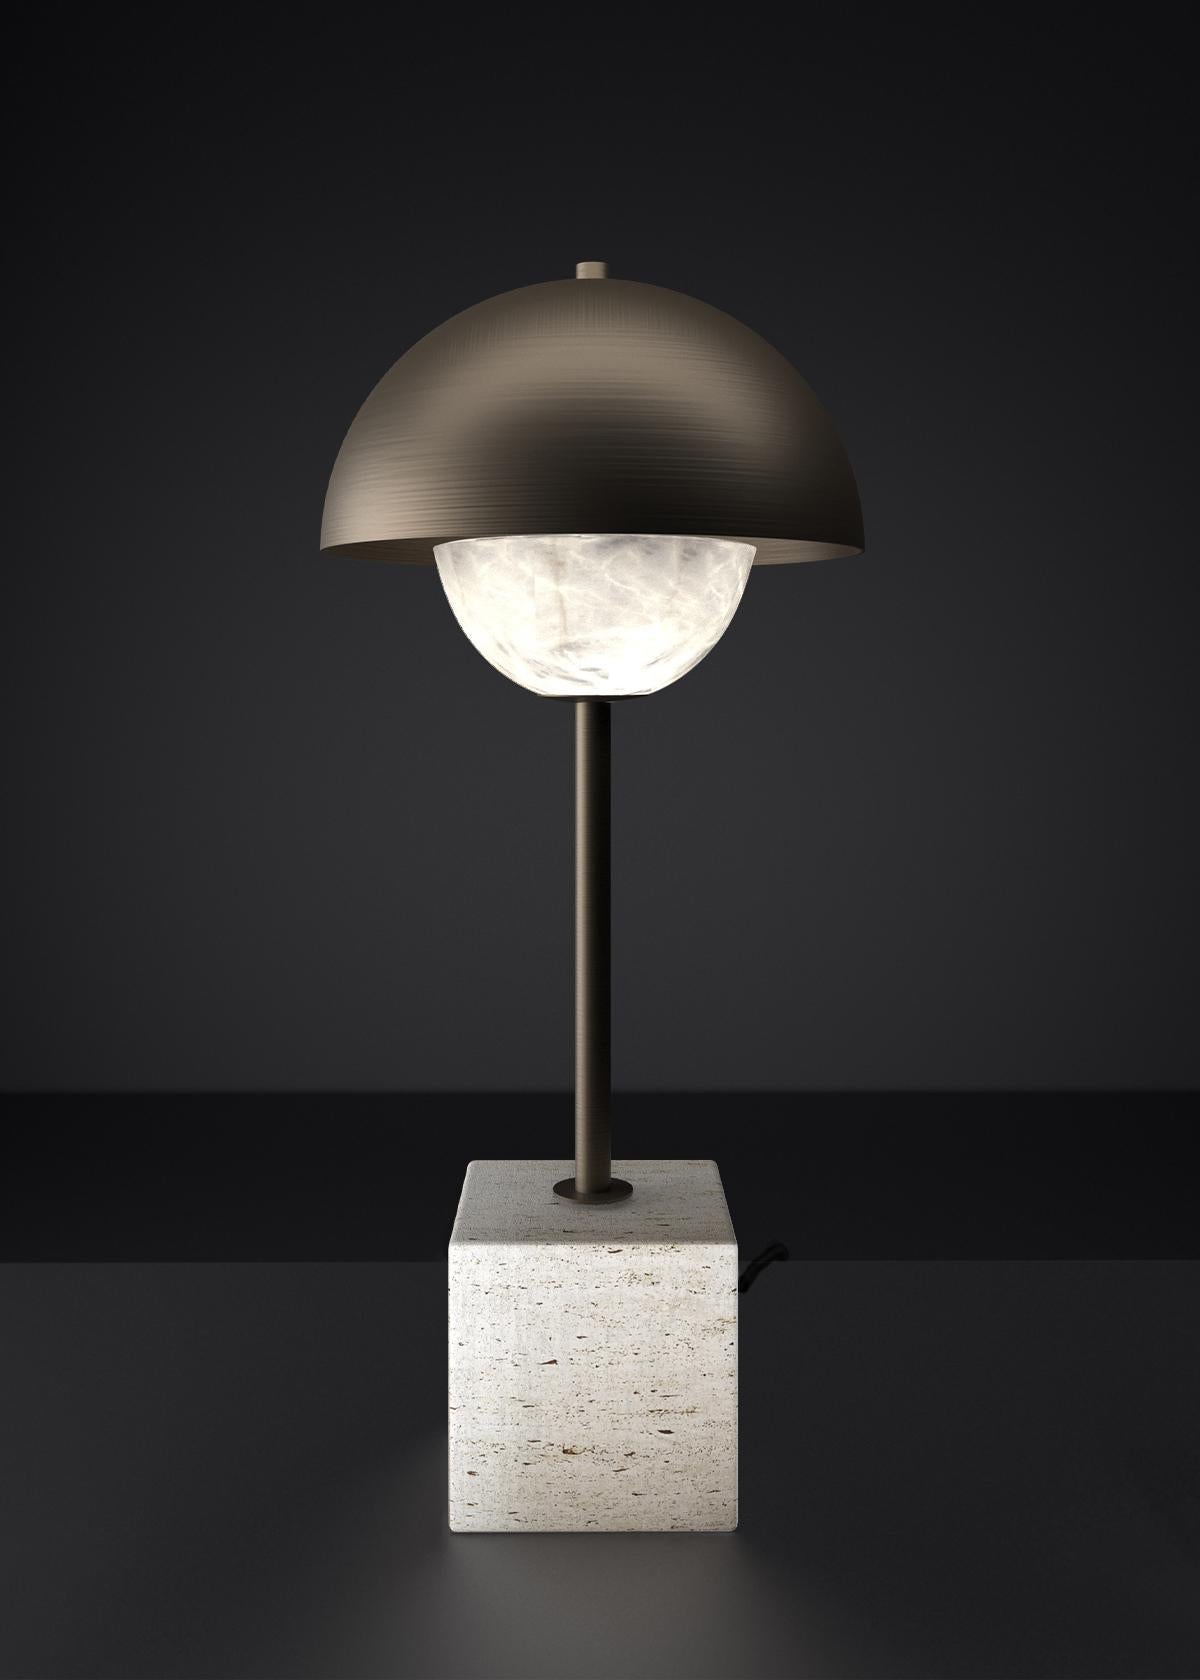 Apollo Brushed Burnished Metal Table Lamp by Alabastro Italiano
Dimensions: D 30 x W 30 x H 74 cm.
Materials: White alabaster, Marble, black silk cables and bronze.

Available in different finishes: Shiny Silver, Bronze, Brushed Brass, Ruggine of